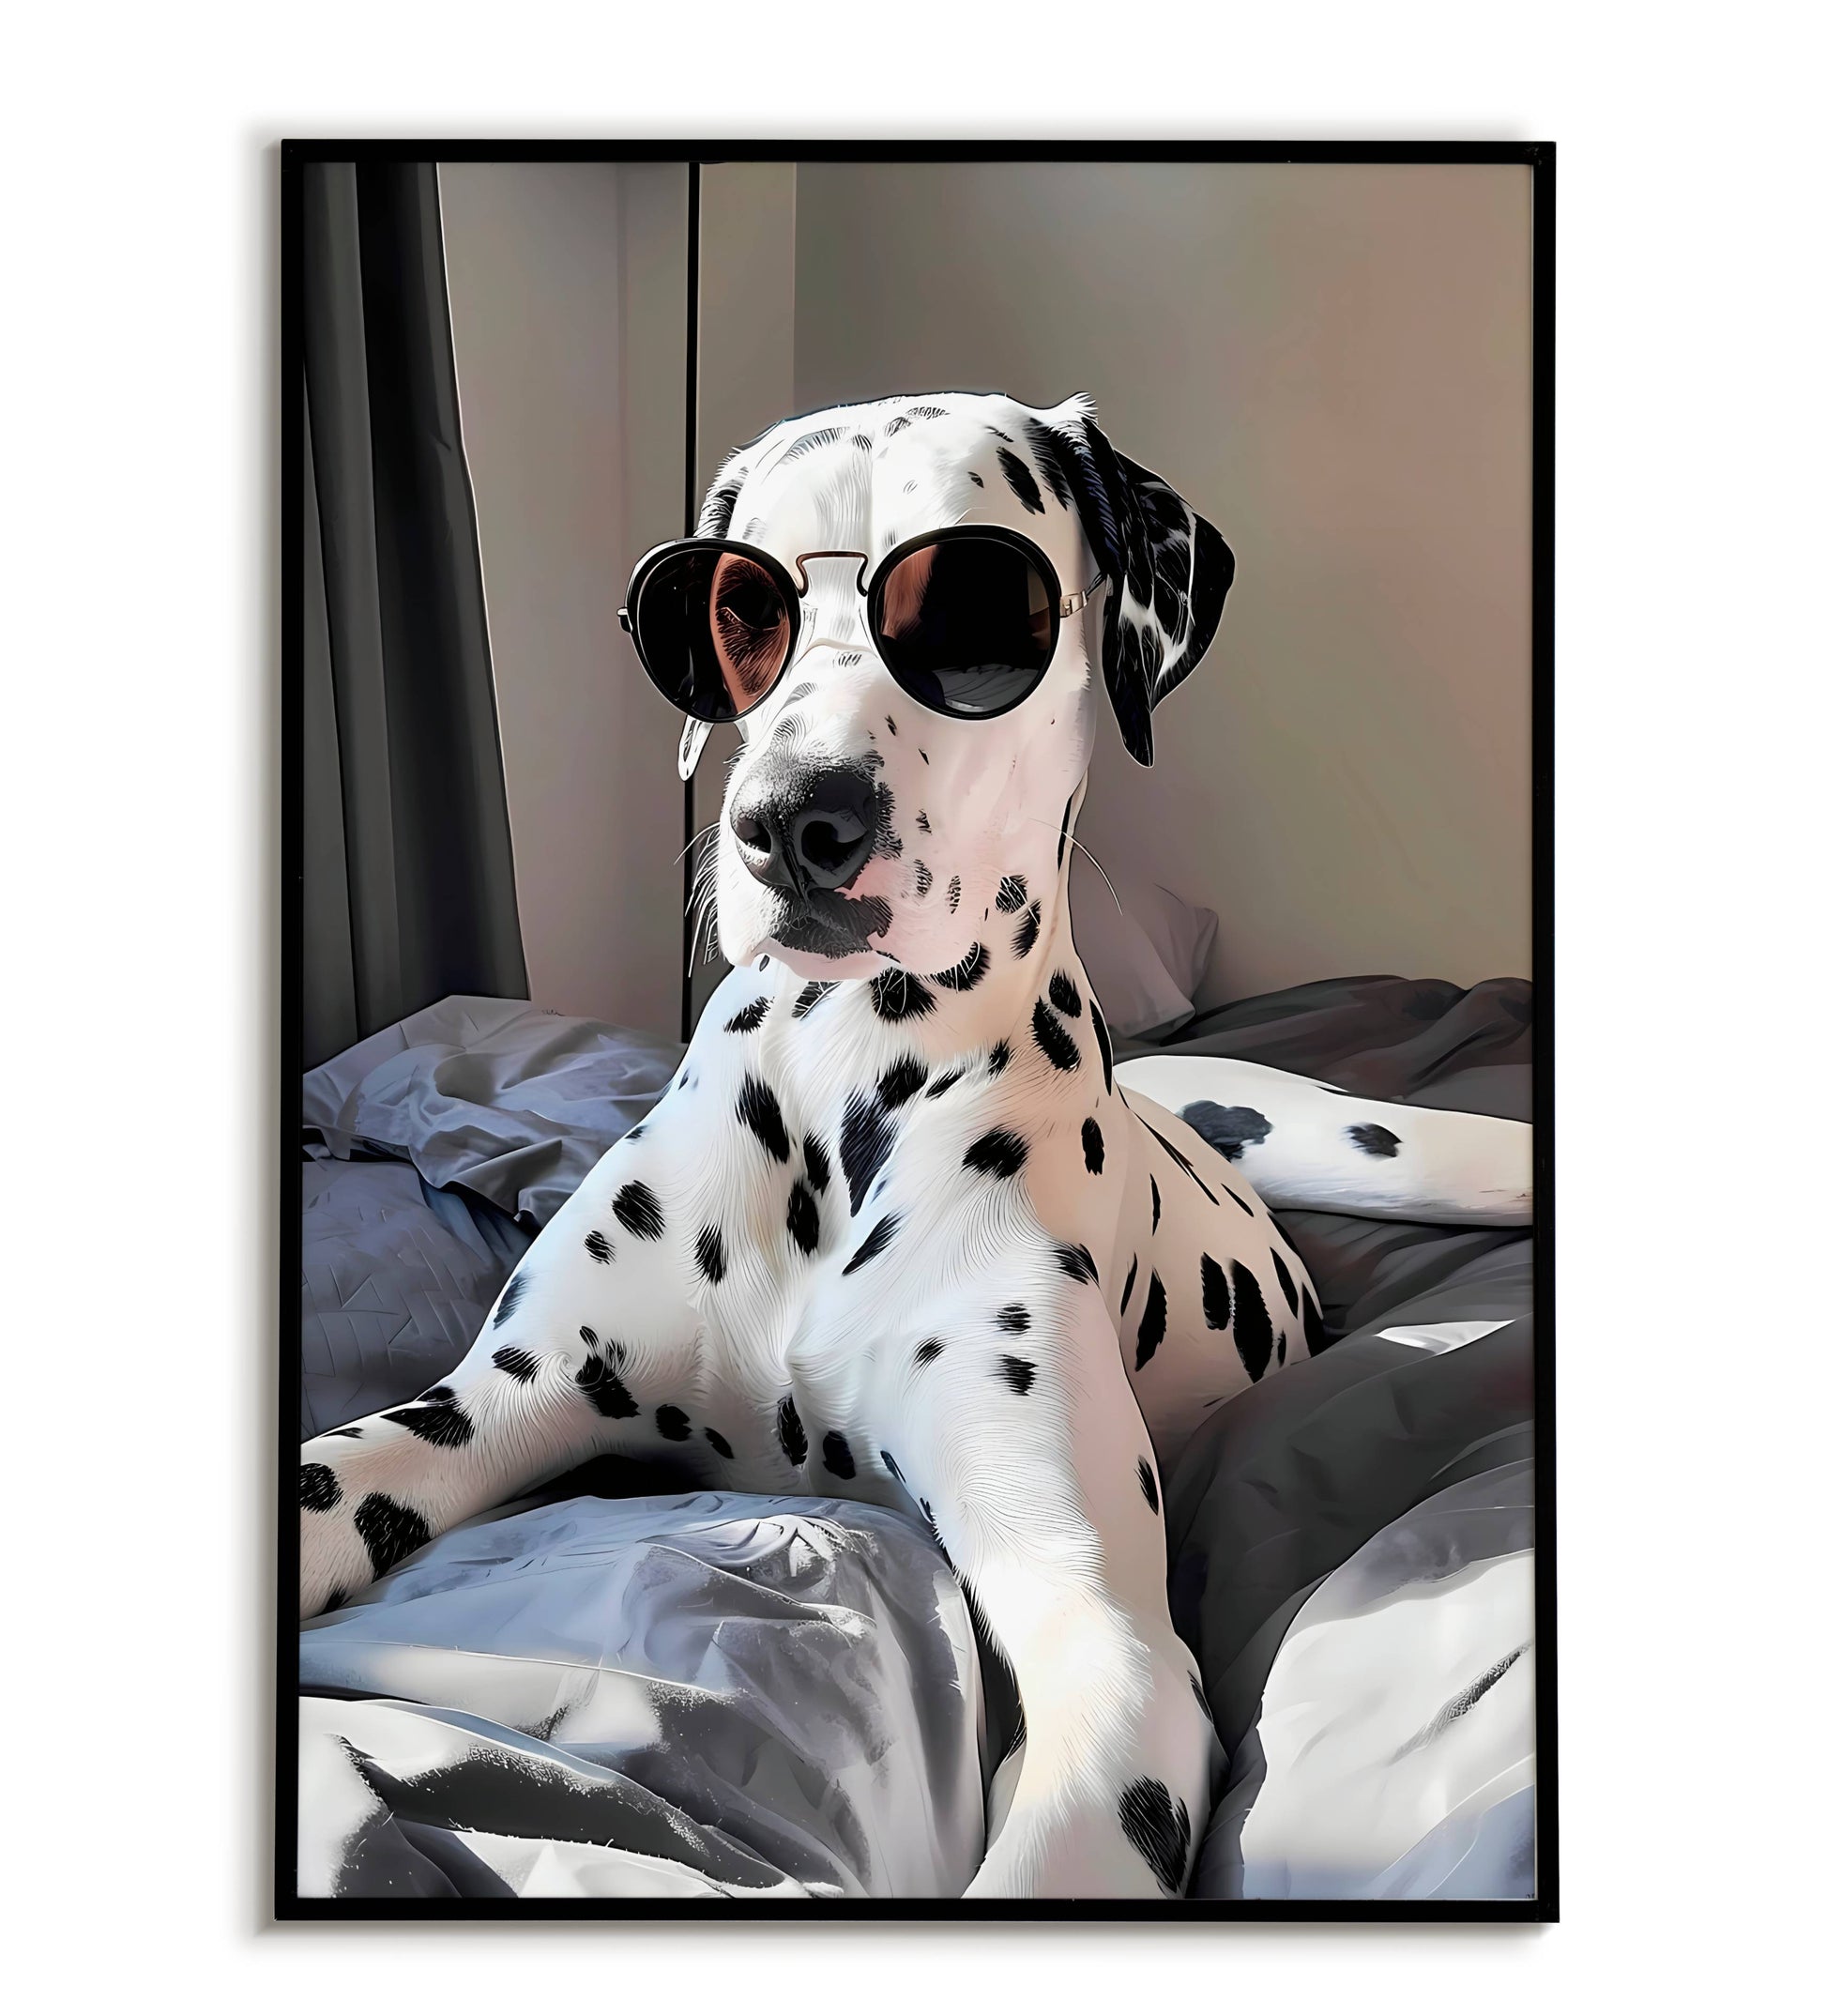 Dalmatian Cool printable poster. Available for purchase as a physical poster or digital download.